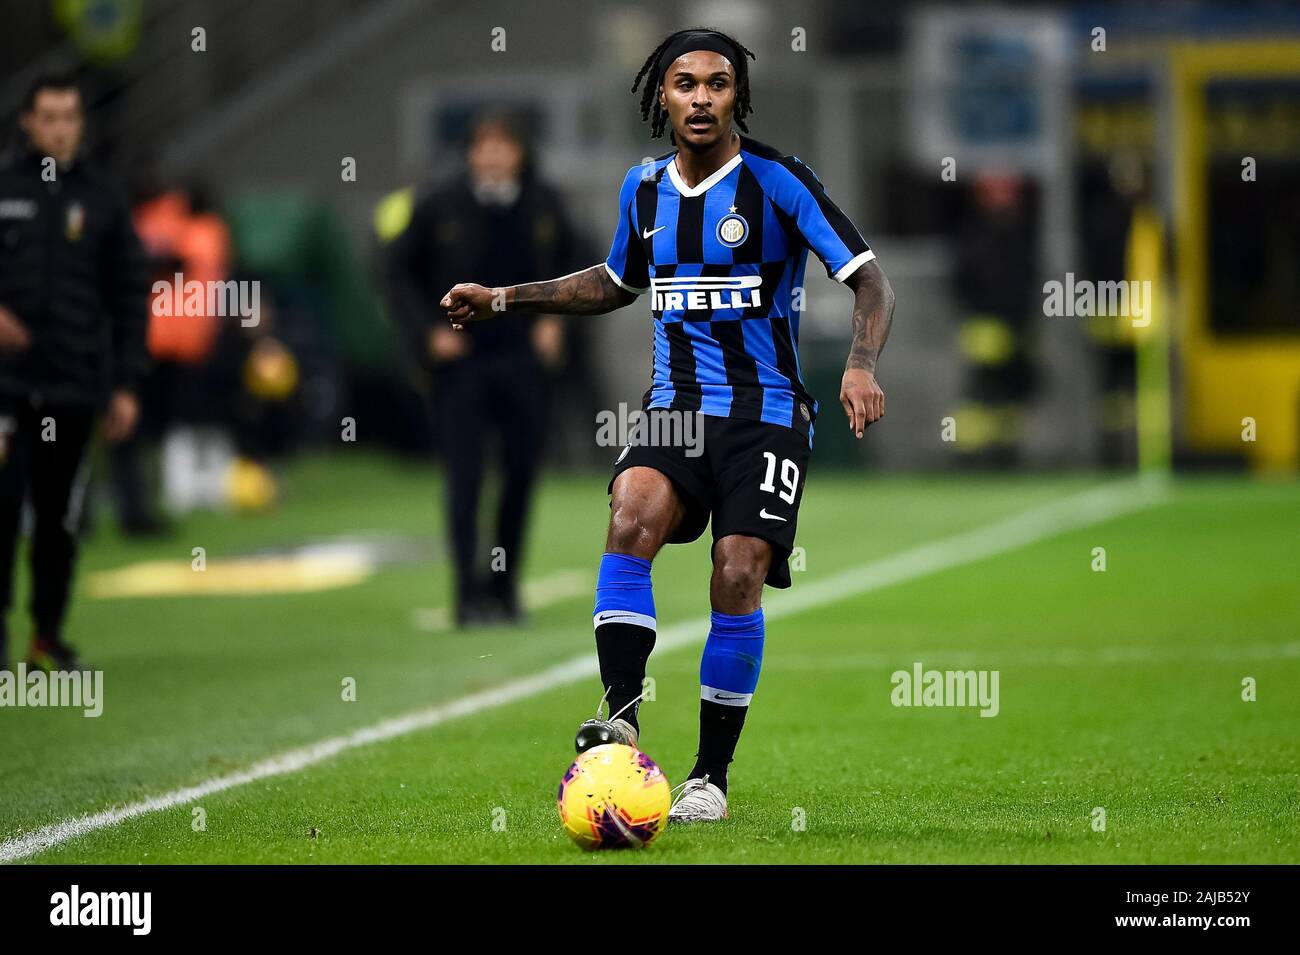 tyfon stabil konvergens Milan, Italy - 09 November, 2019: Valentino Lazaro of FC Internazionale in  action during the Serie A football match between FC Internazionale and  Hellas Verona. FC Internazionale won 2-1 over Hellas Verona.